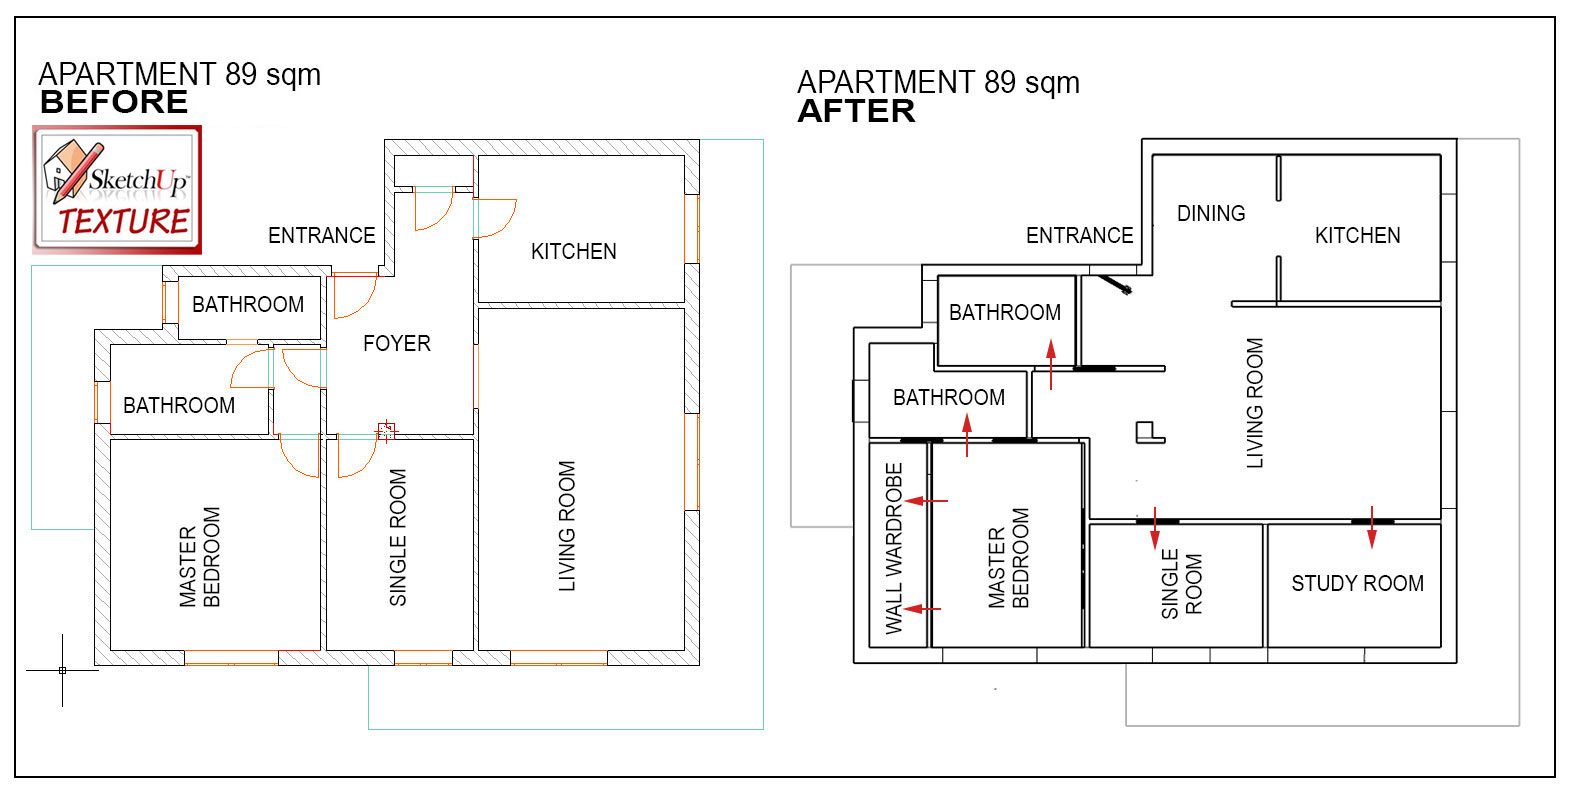 2d layout renovated apartment 89 sqm before - after